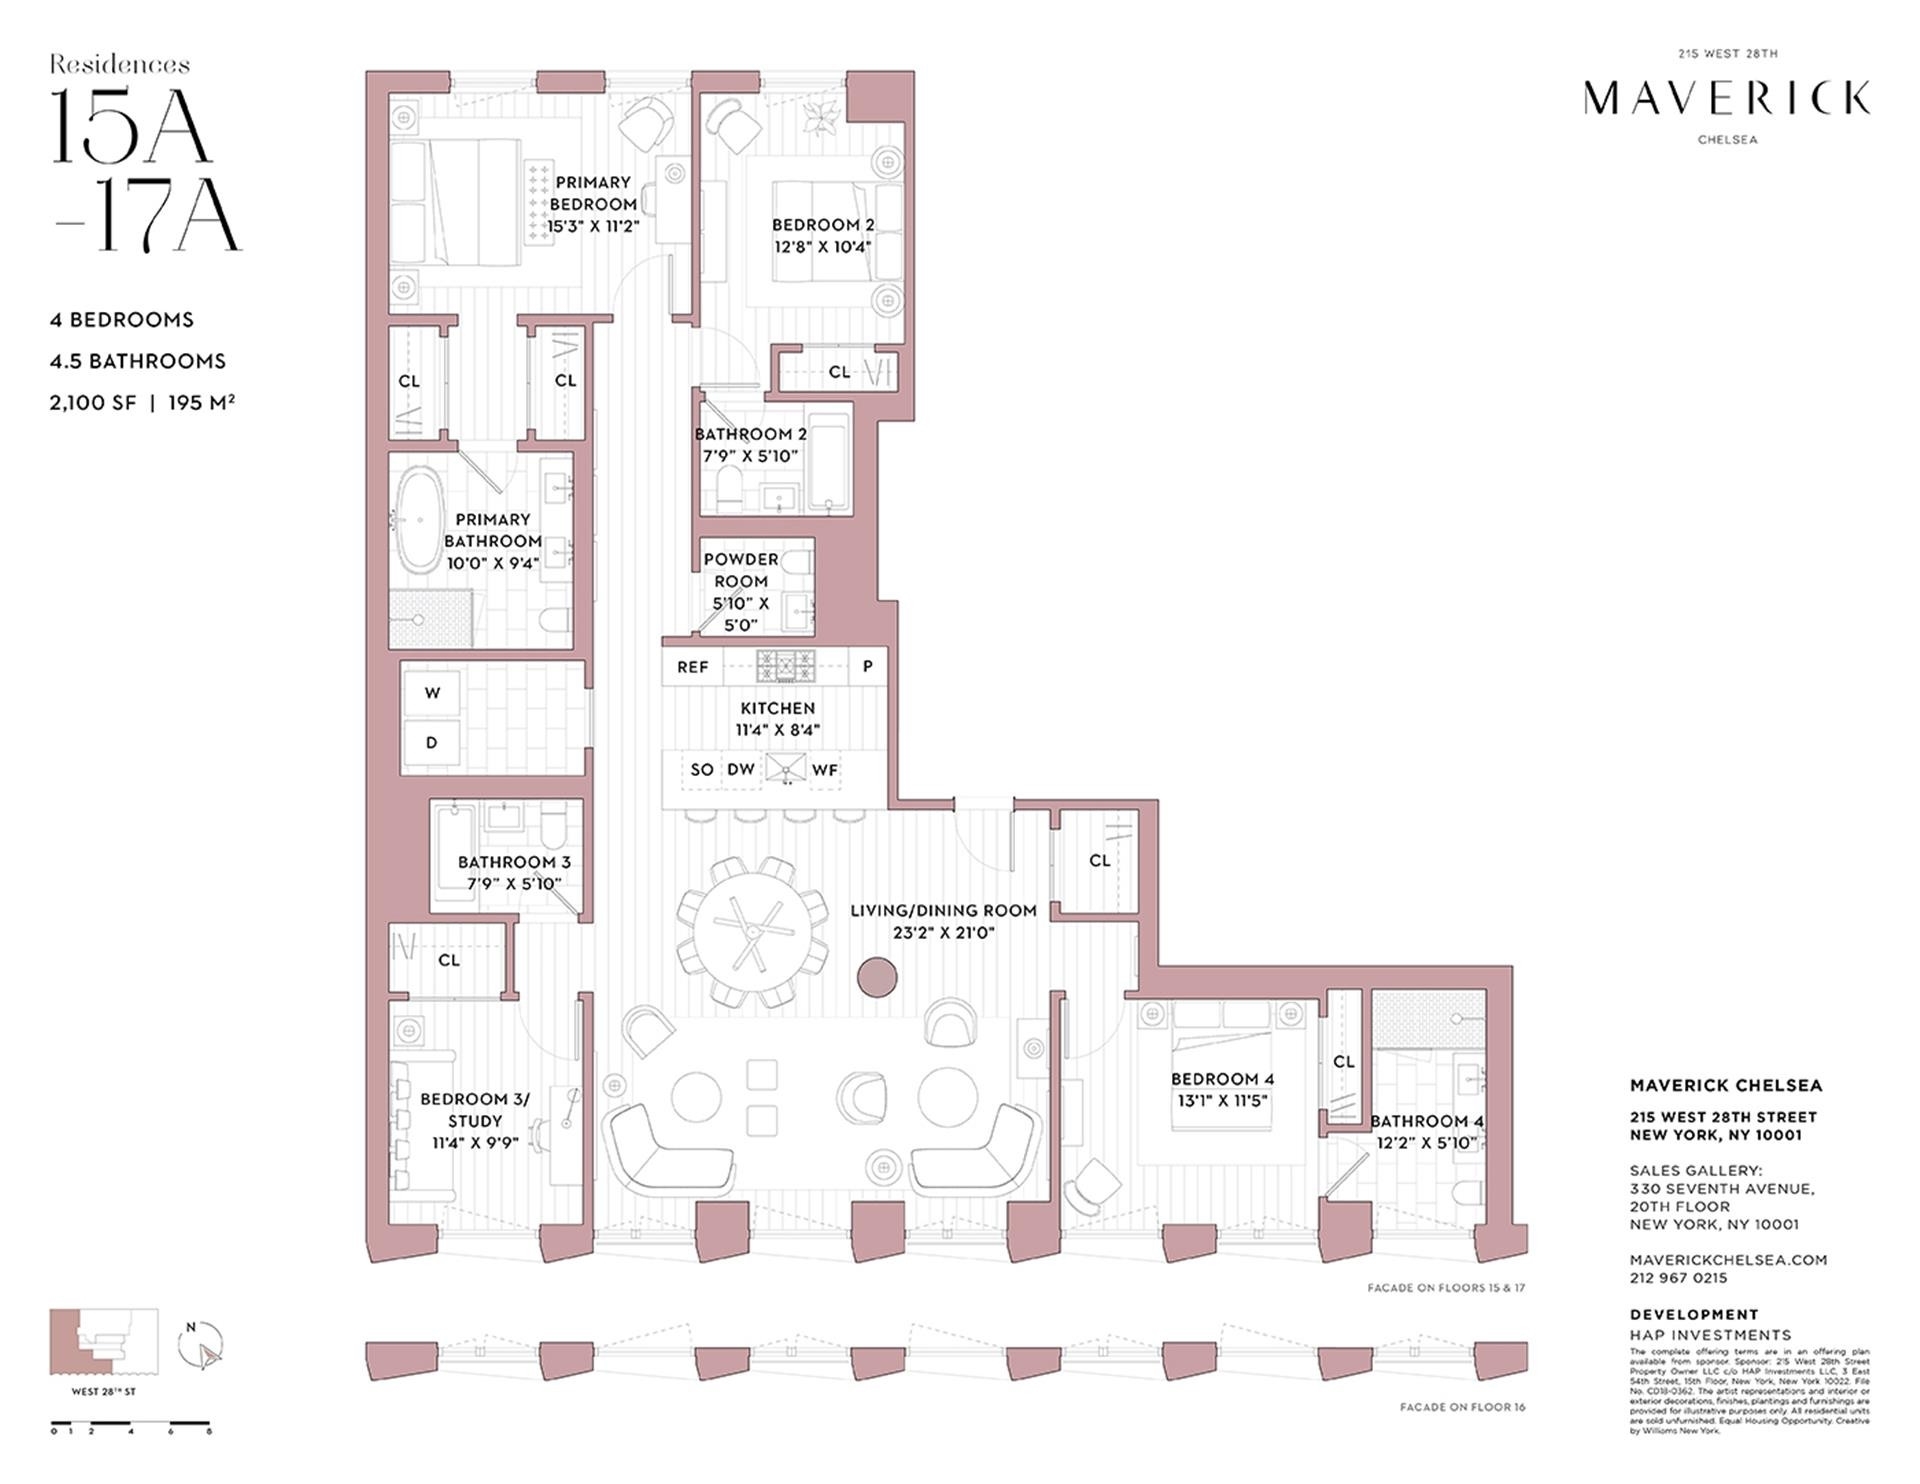 1. Condominiums for Sale at Maverick, 215 W 28TH ST, 16A Chelsea, New York, New York 10001